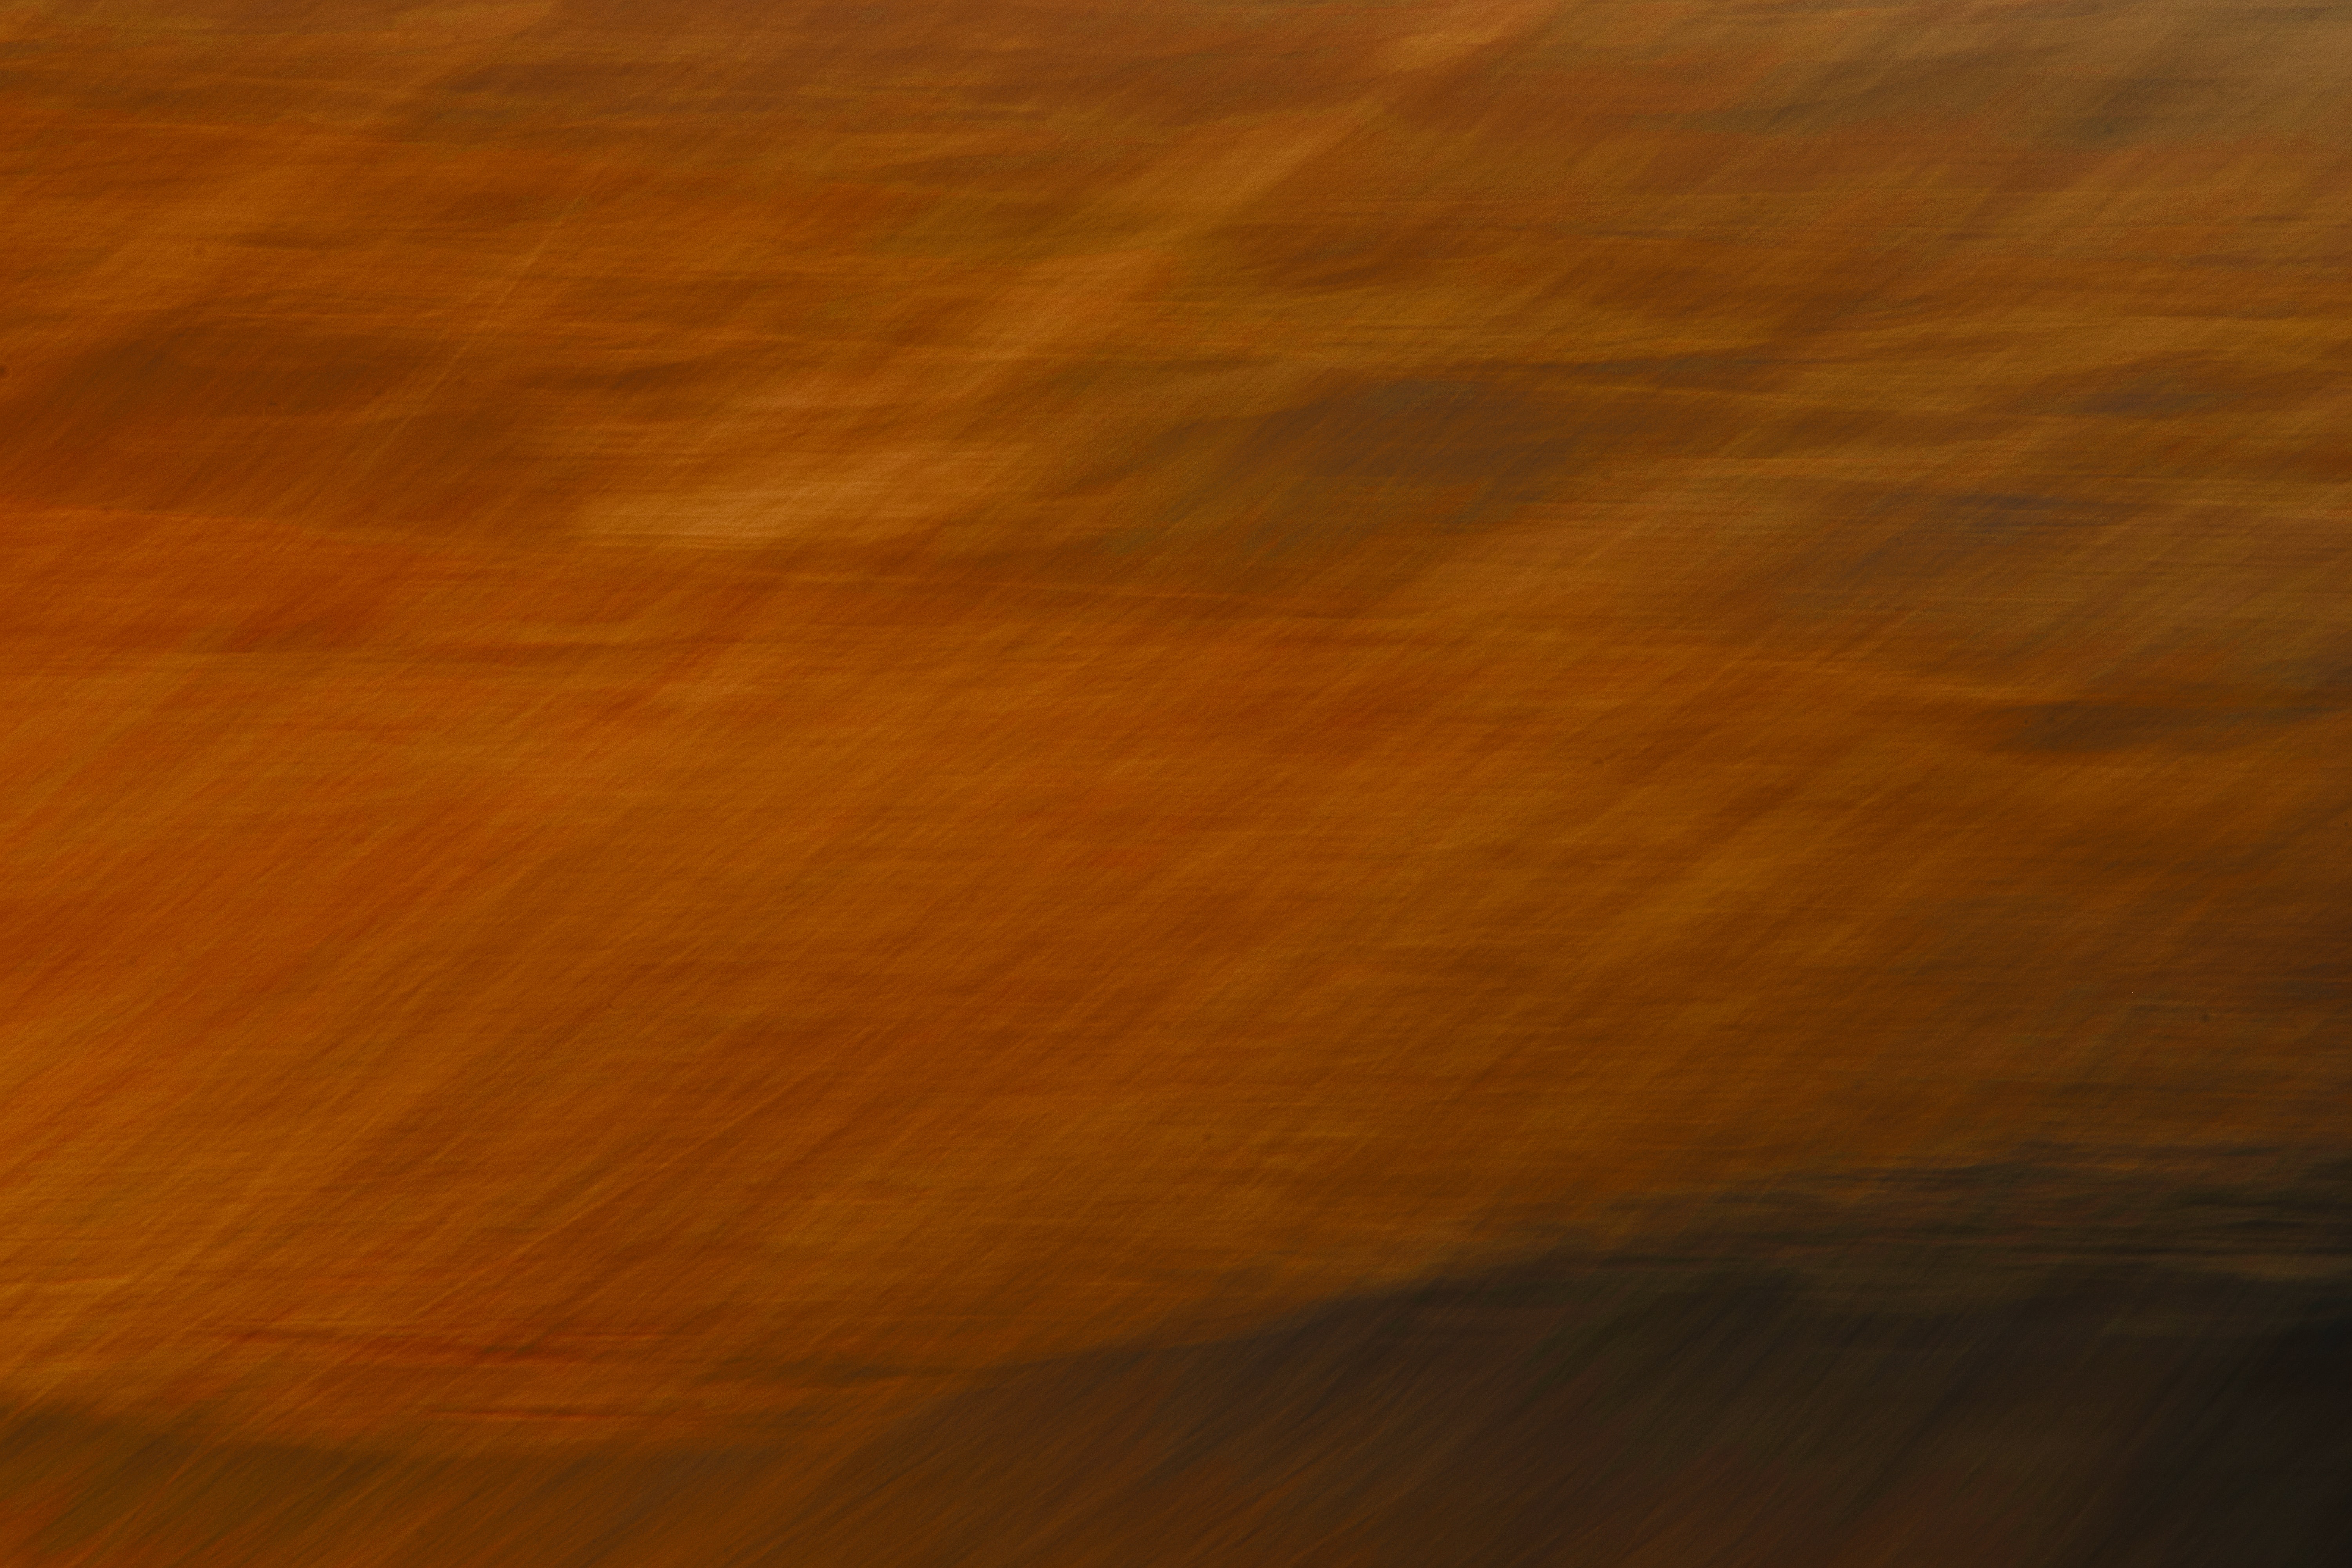 brown, blur, background, abstract, smooth iphone wallpaper